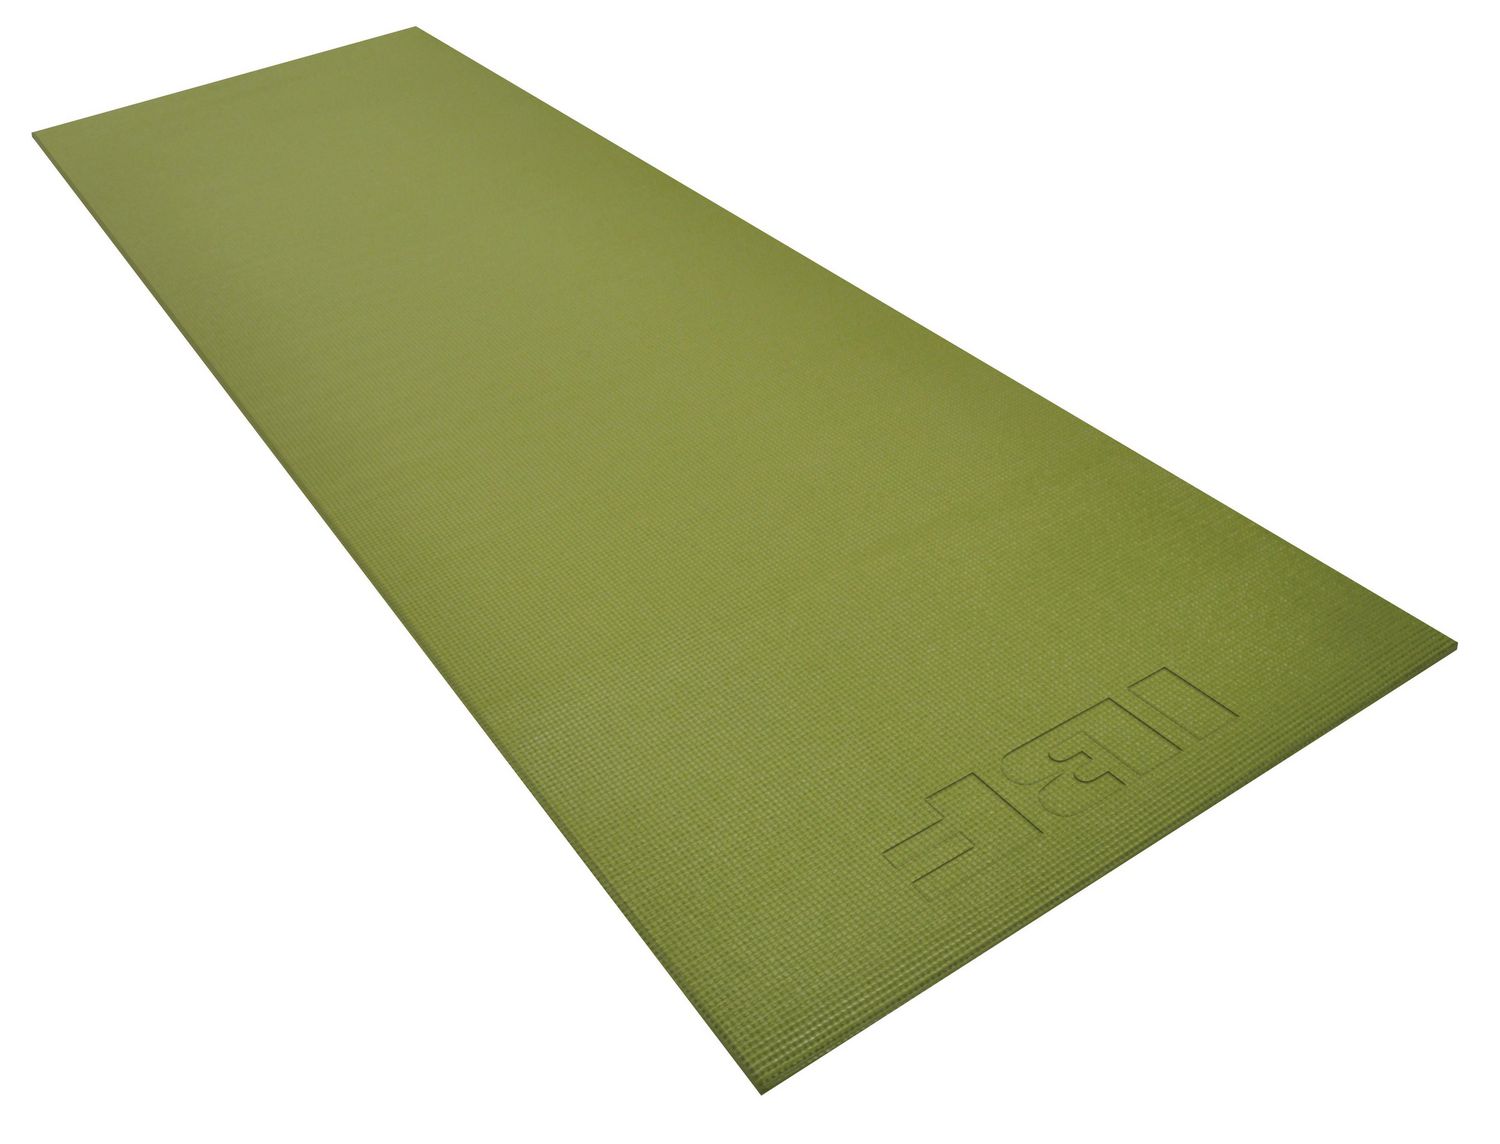  Happy Easter B Extra Thick Yoga Mat - Eco Friendly Non-Slip  Exercise & Fitness Mat Workout Mat for All Type of Yoga, Pilates and Floor Exercises  72x24in : Everything Else